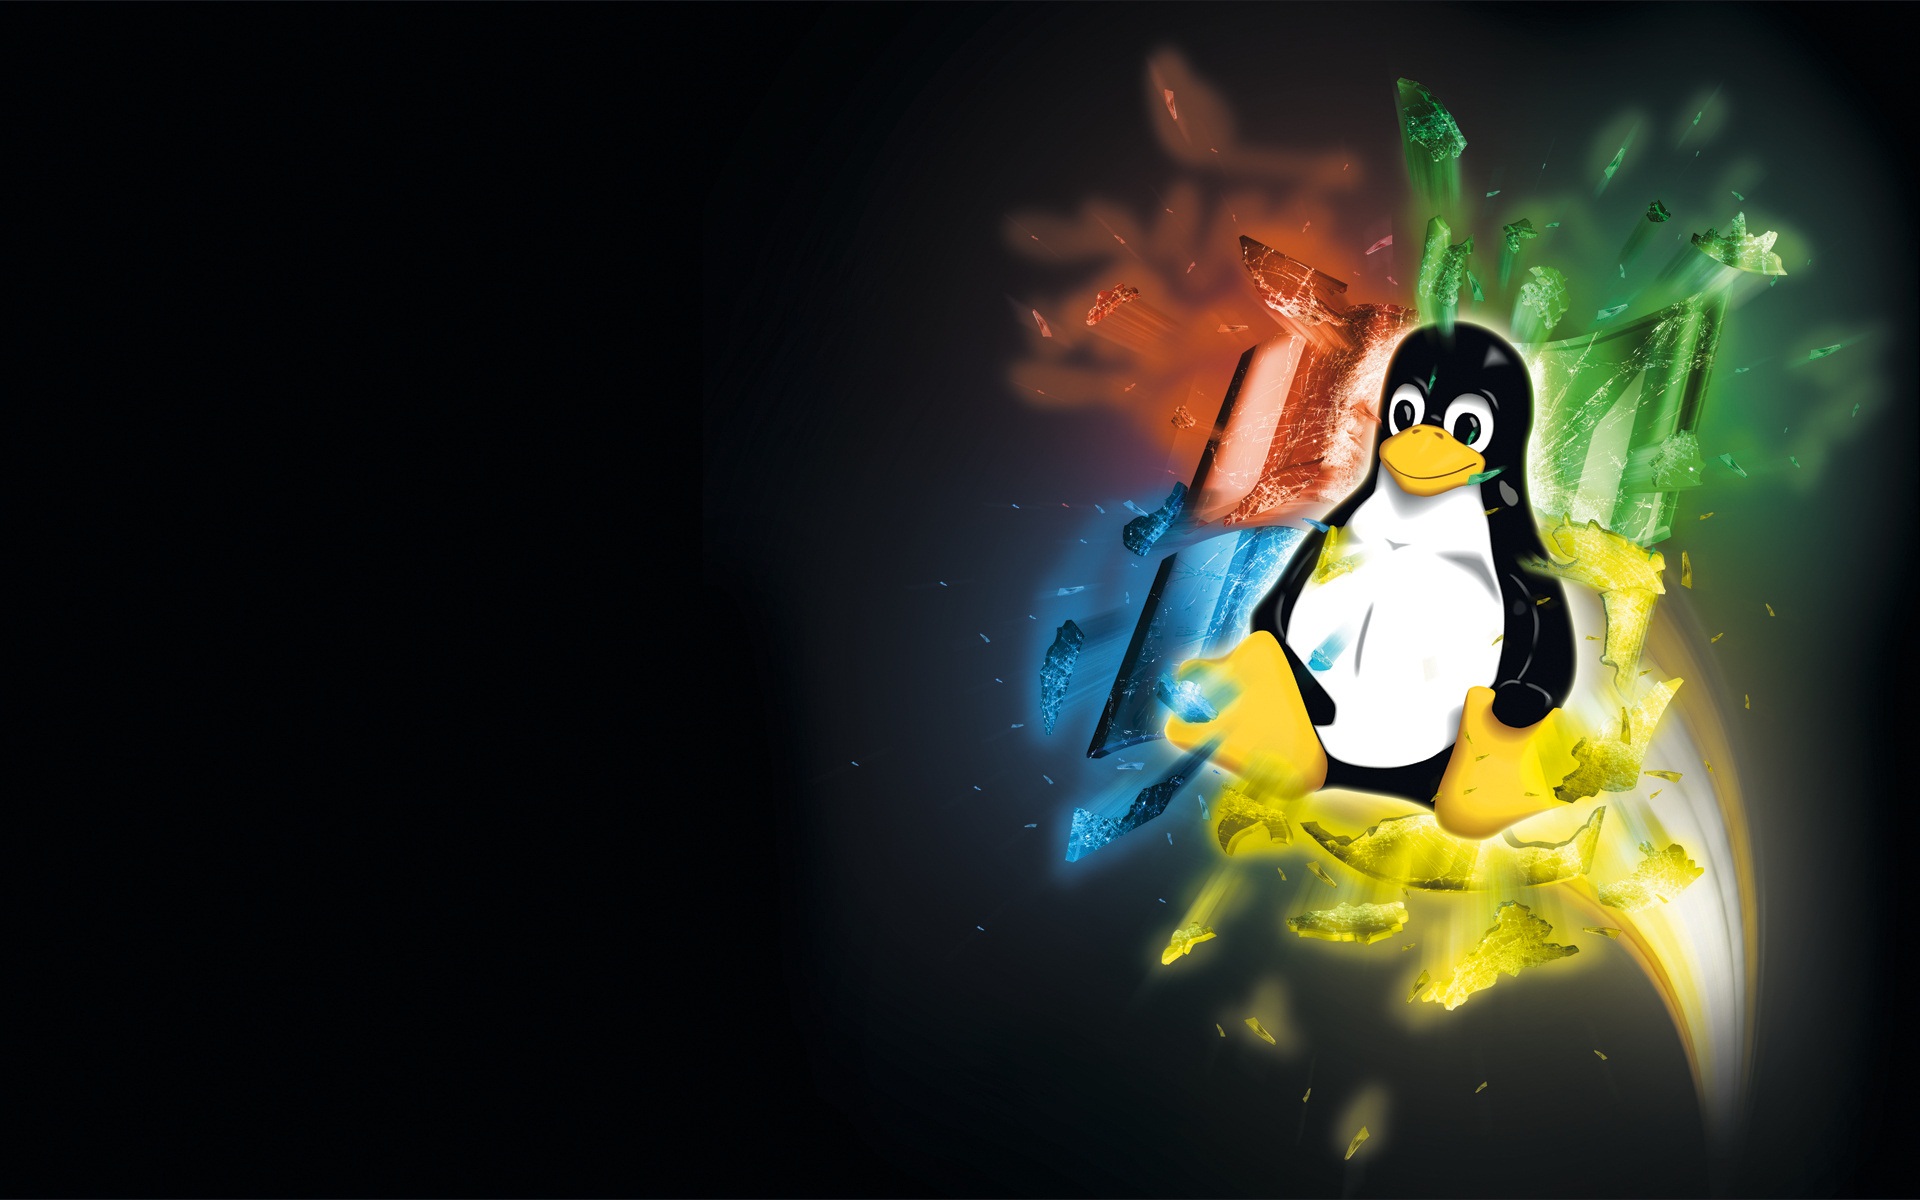 Cool Linux Background